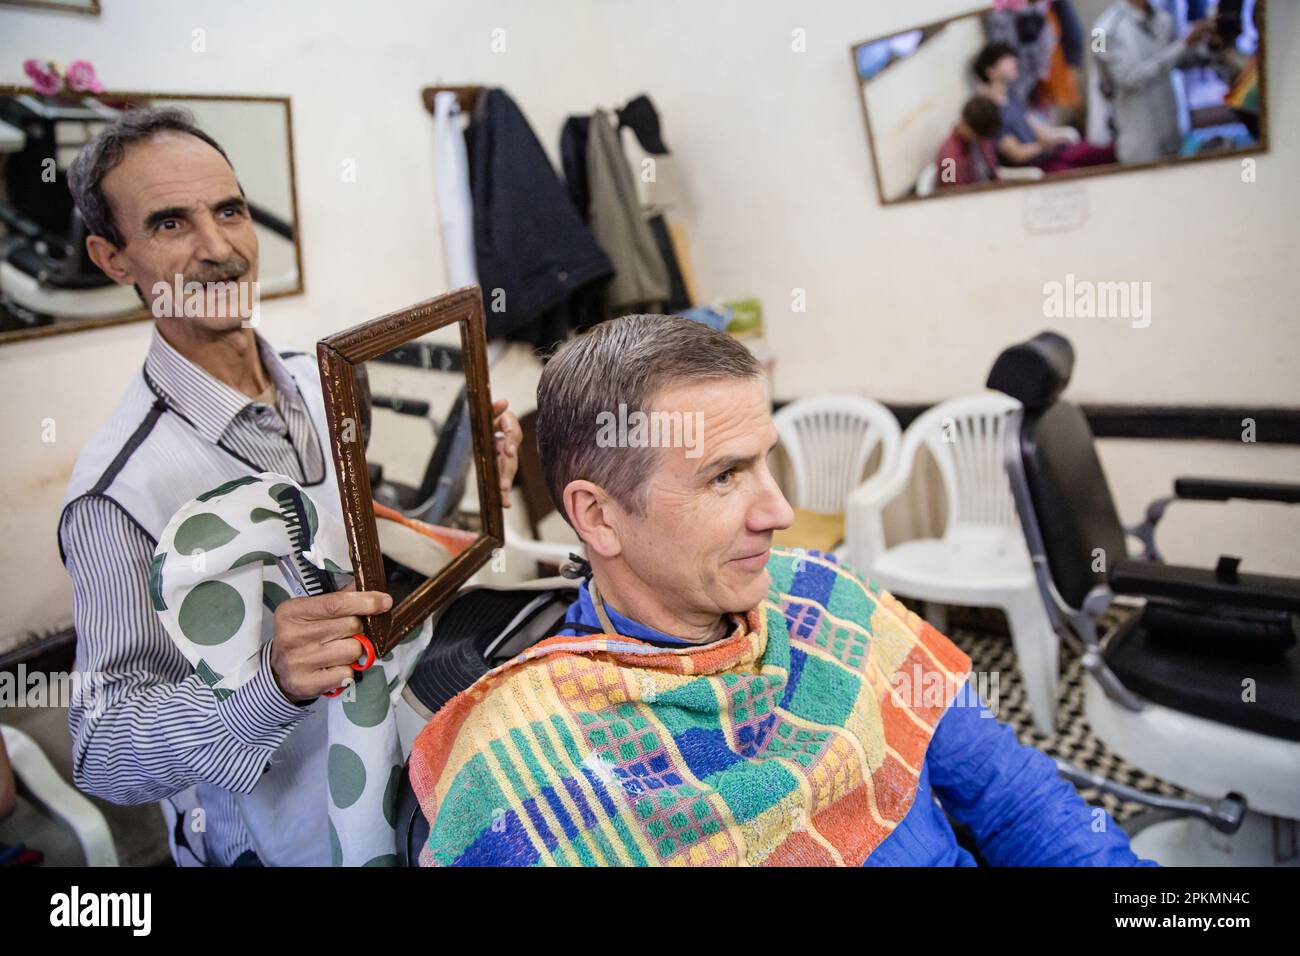 An American tourist looks in a mirror after getting a straight razor shave and a haircut in a barbershop in Marrakech Morocco Stock Photo